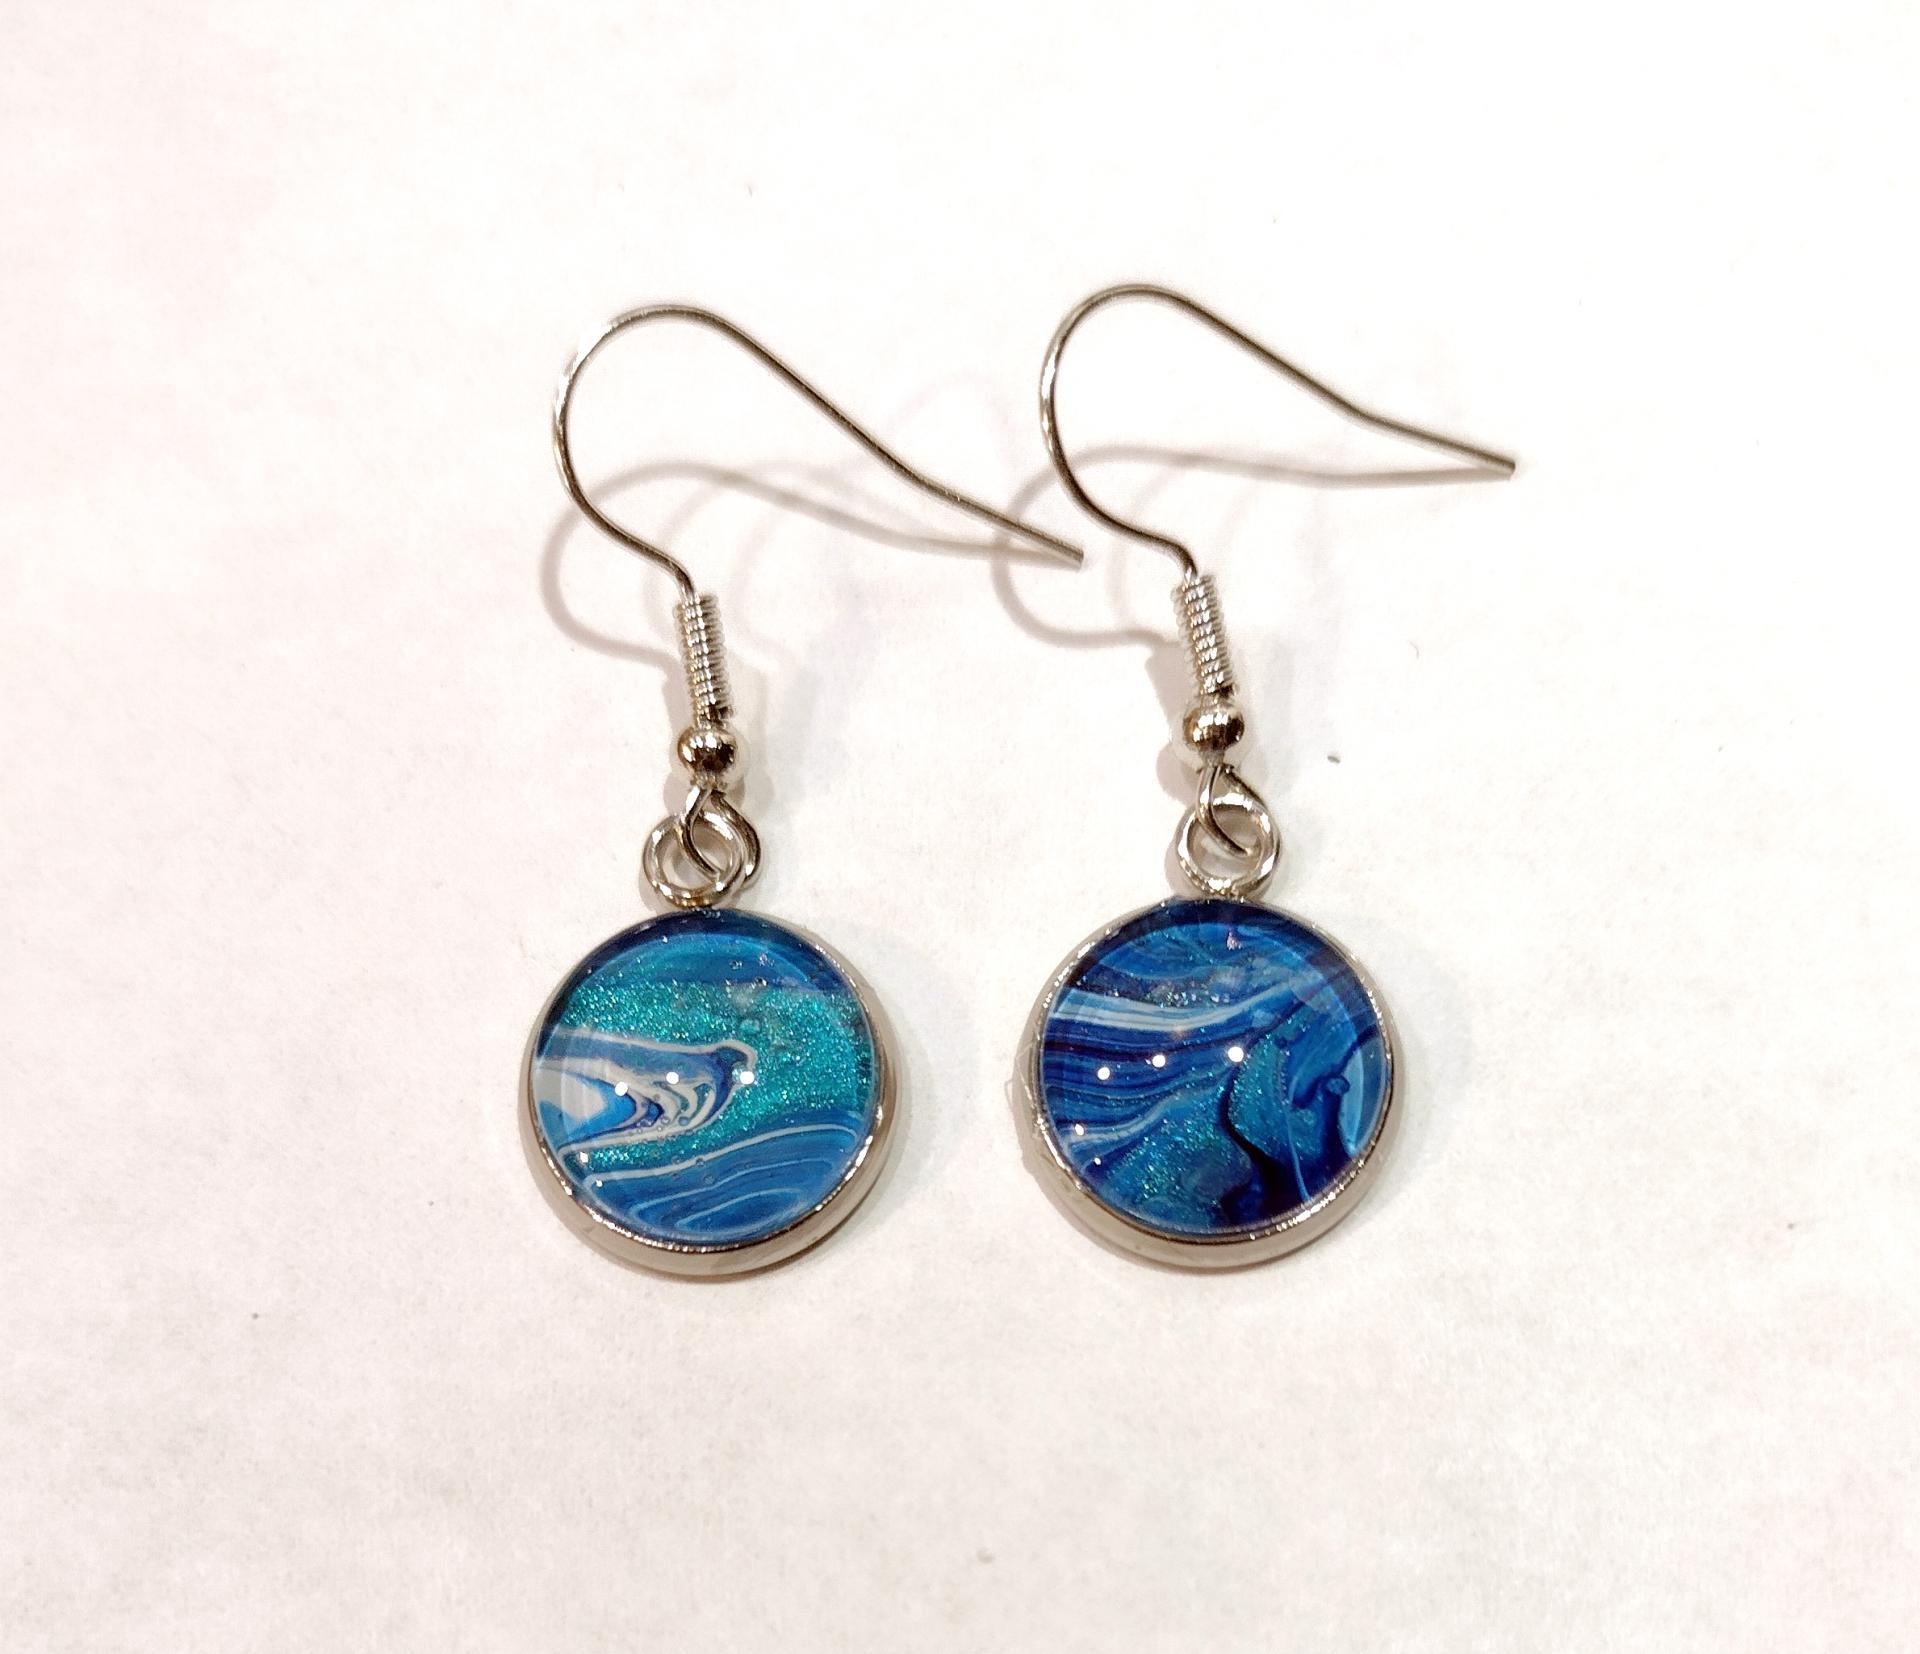 Painted Earrings, Blue and Silver Swirl